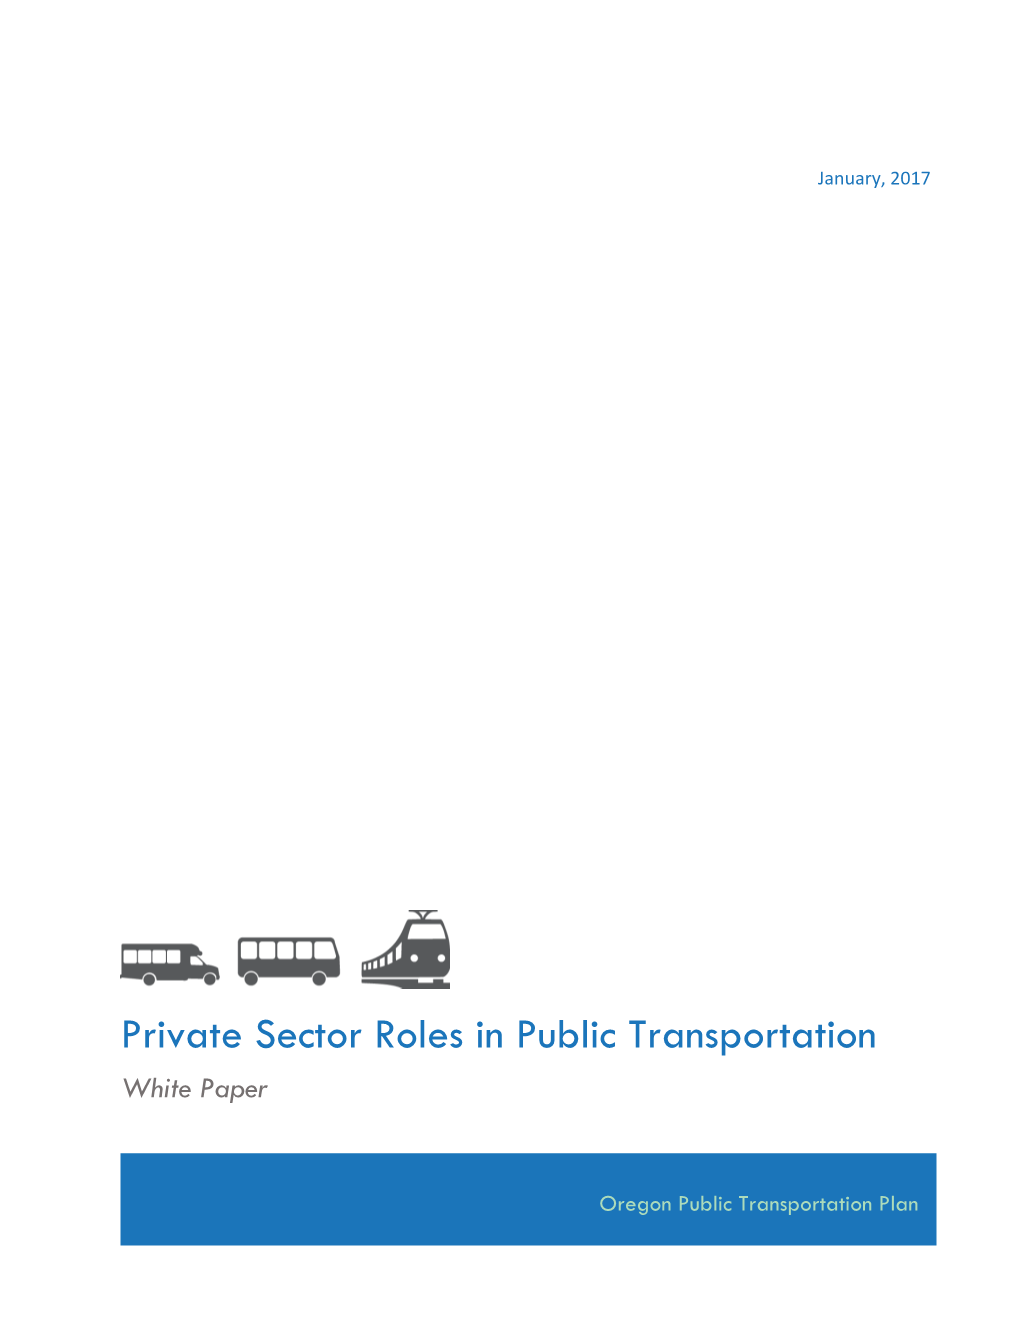 Private Sector Roles in Public Transportation White Paper